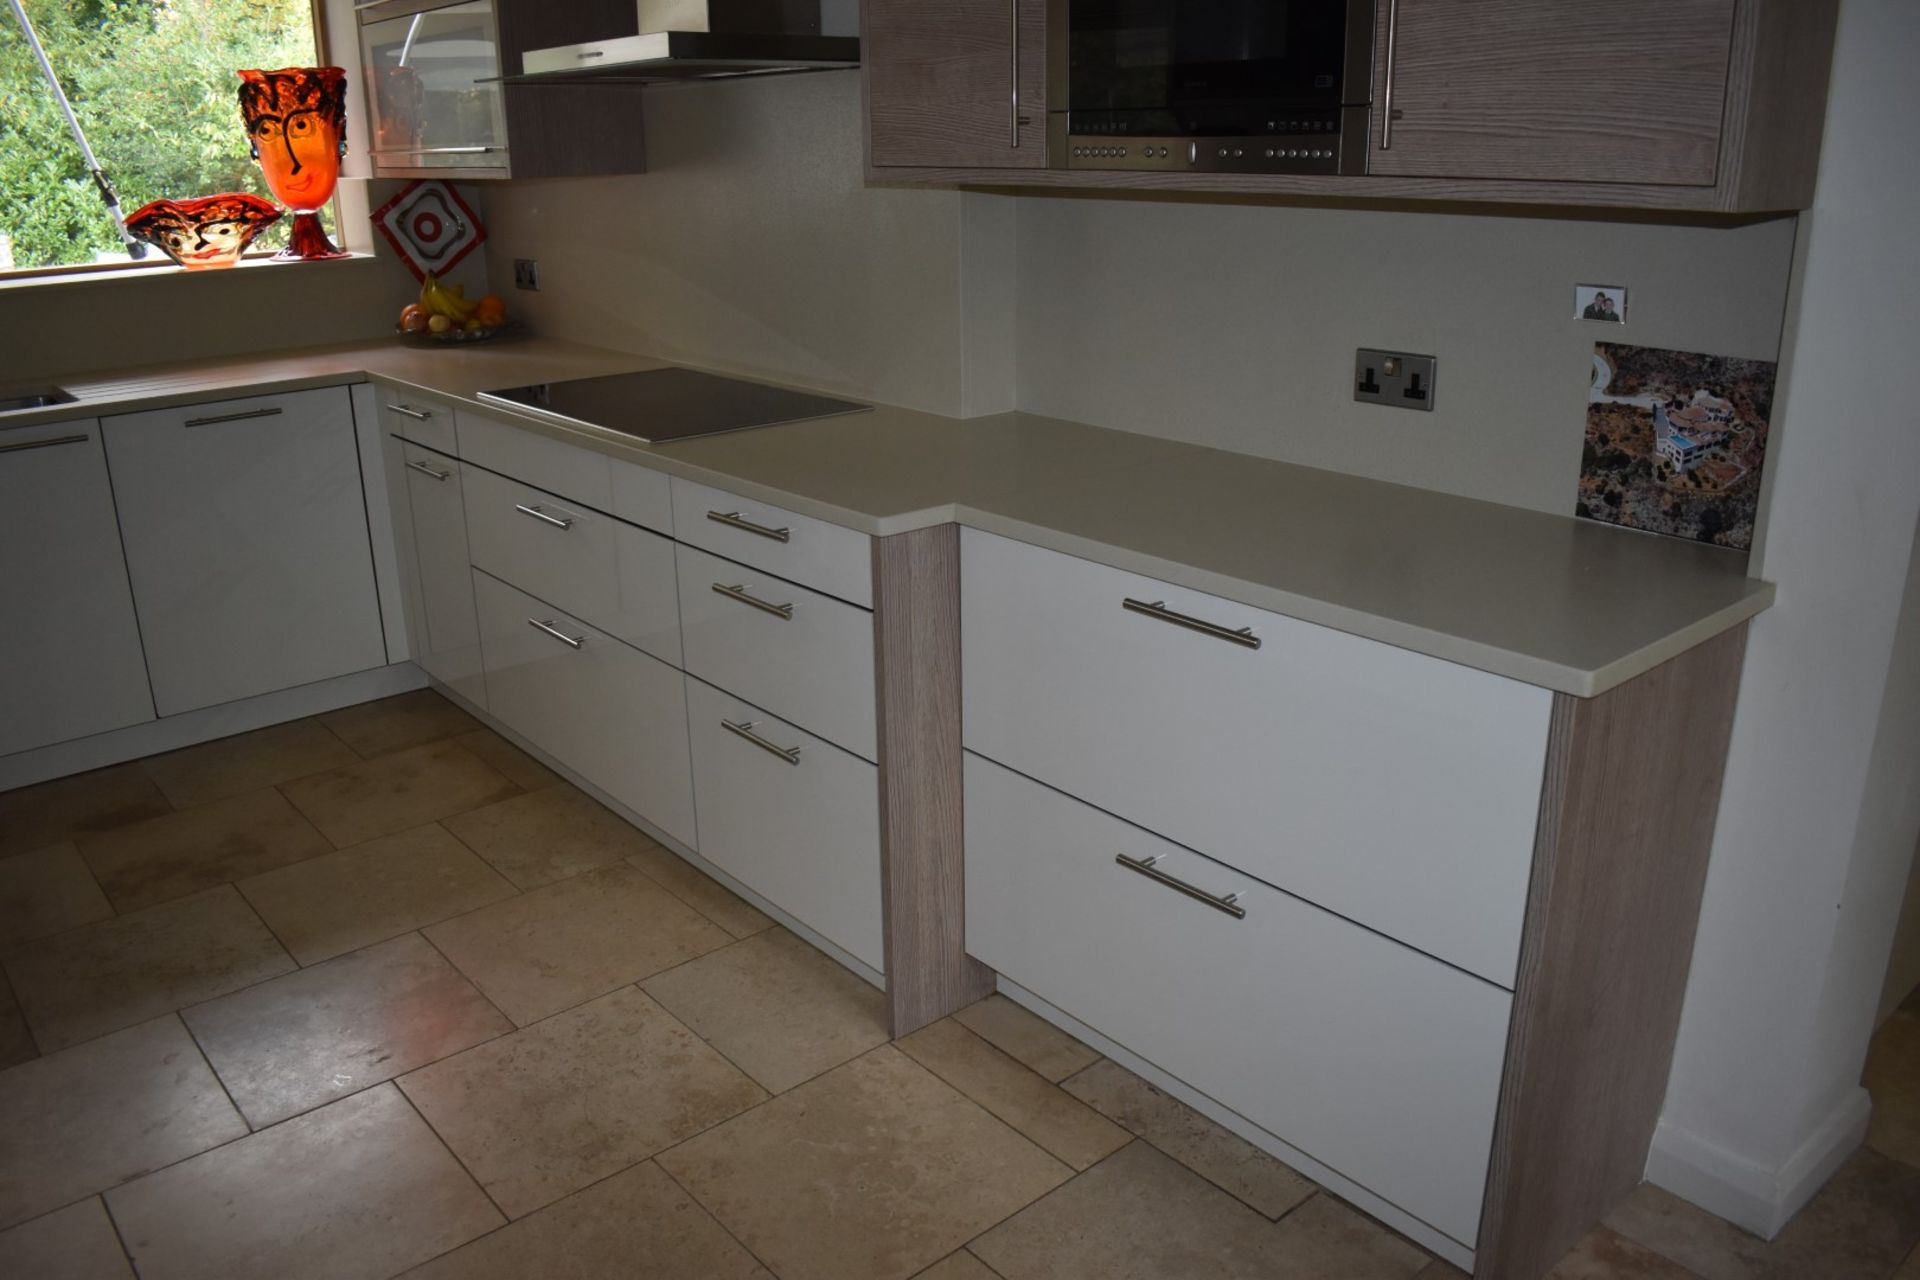 1 x Pronorm Einbauküchen German Made Fitted Kitchen With Contemporary High Gloss Cream Doors and - Image 21 of 50